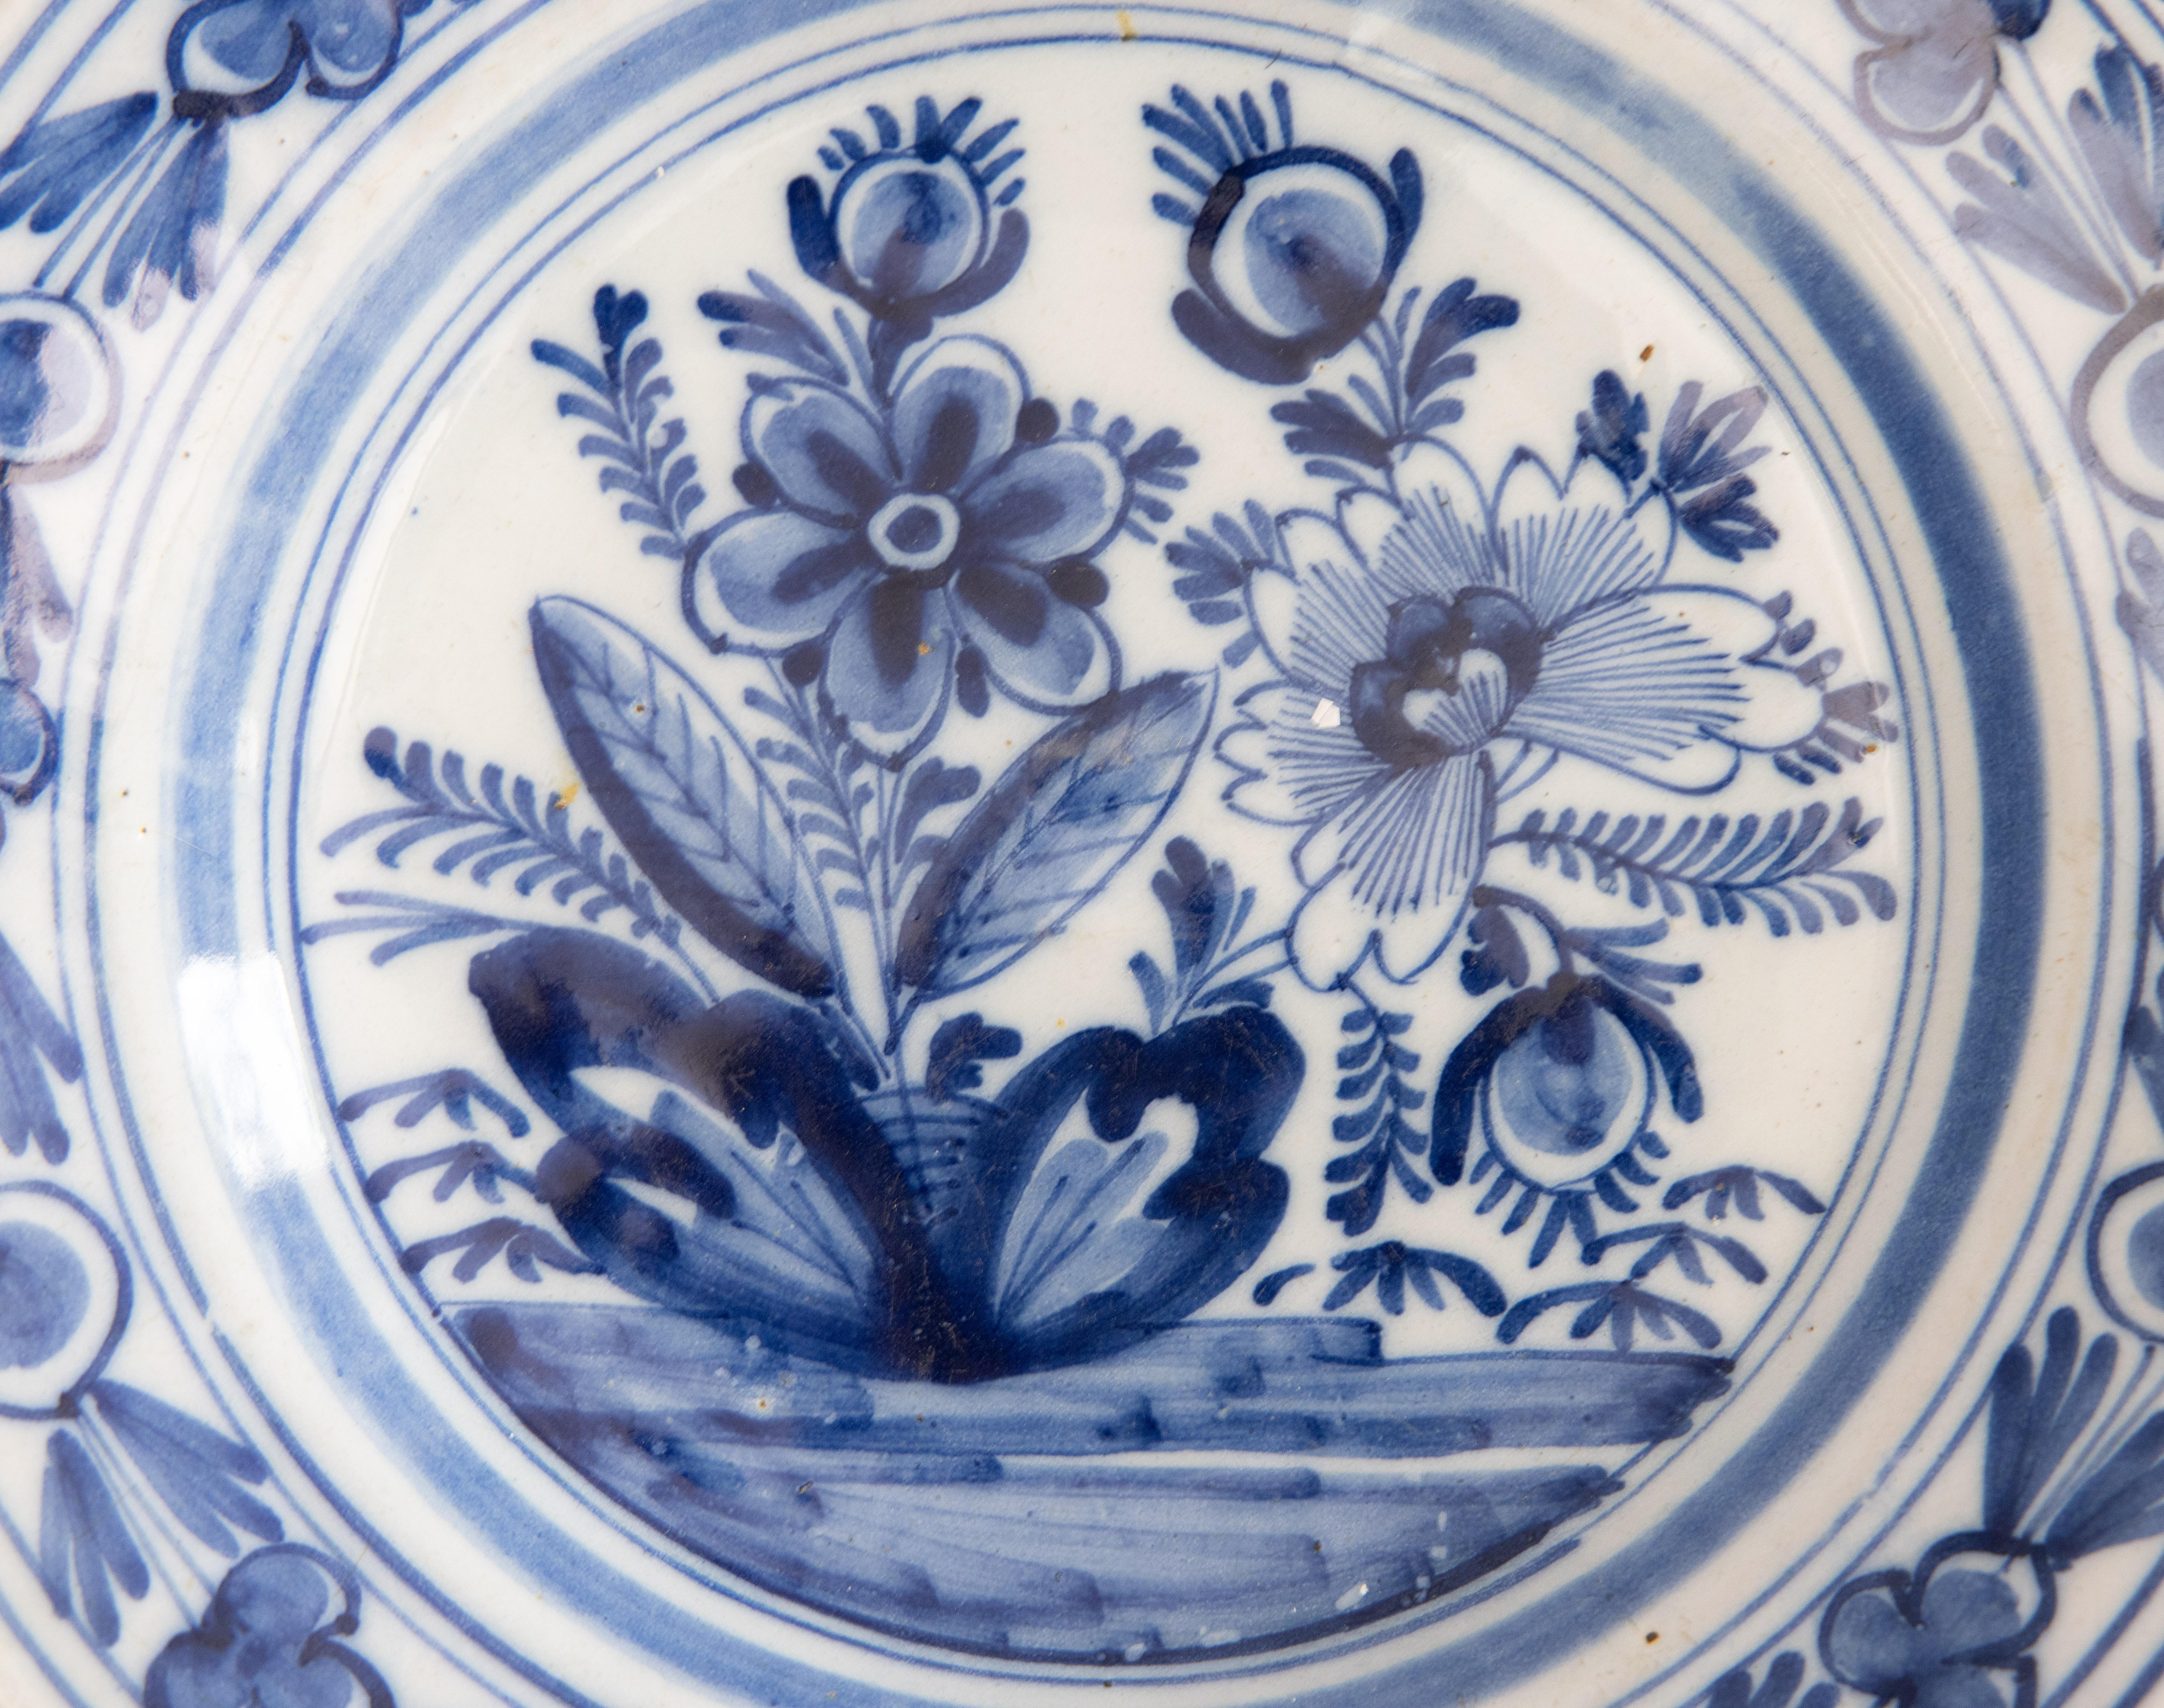 Pair of 18th Century Dutch Delft Faience Floral Plates In Good Condition For Sale In Pearland, TX